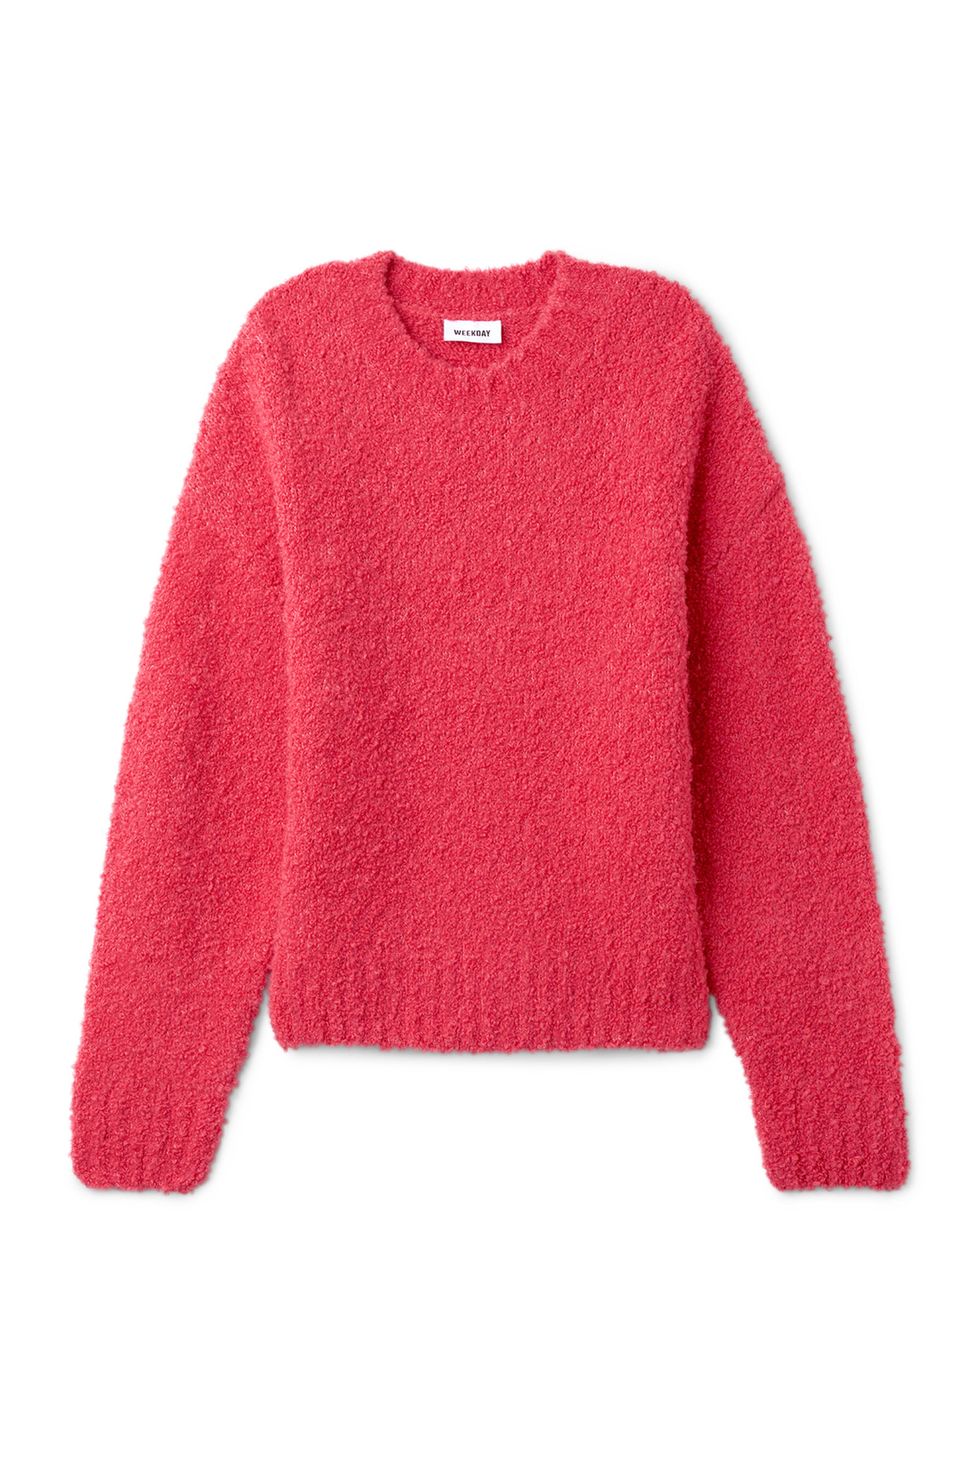 Clothing, Sleeve, Pink, Outerwear, Red, Sweater, Jersey, Top, Magenta, Neck, 